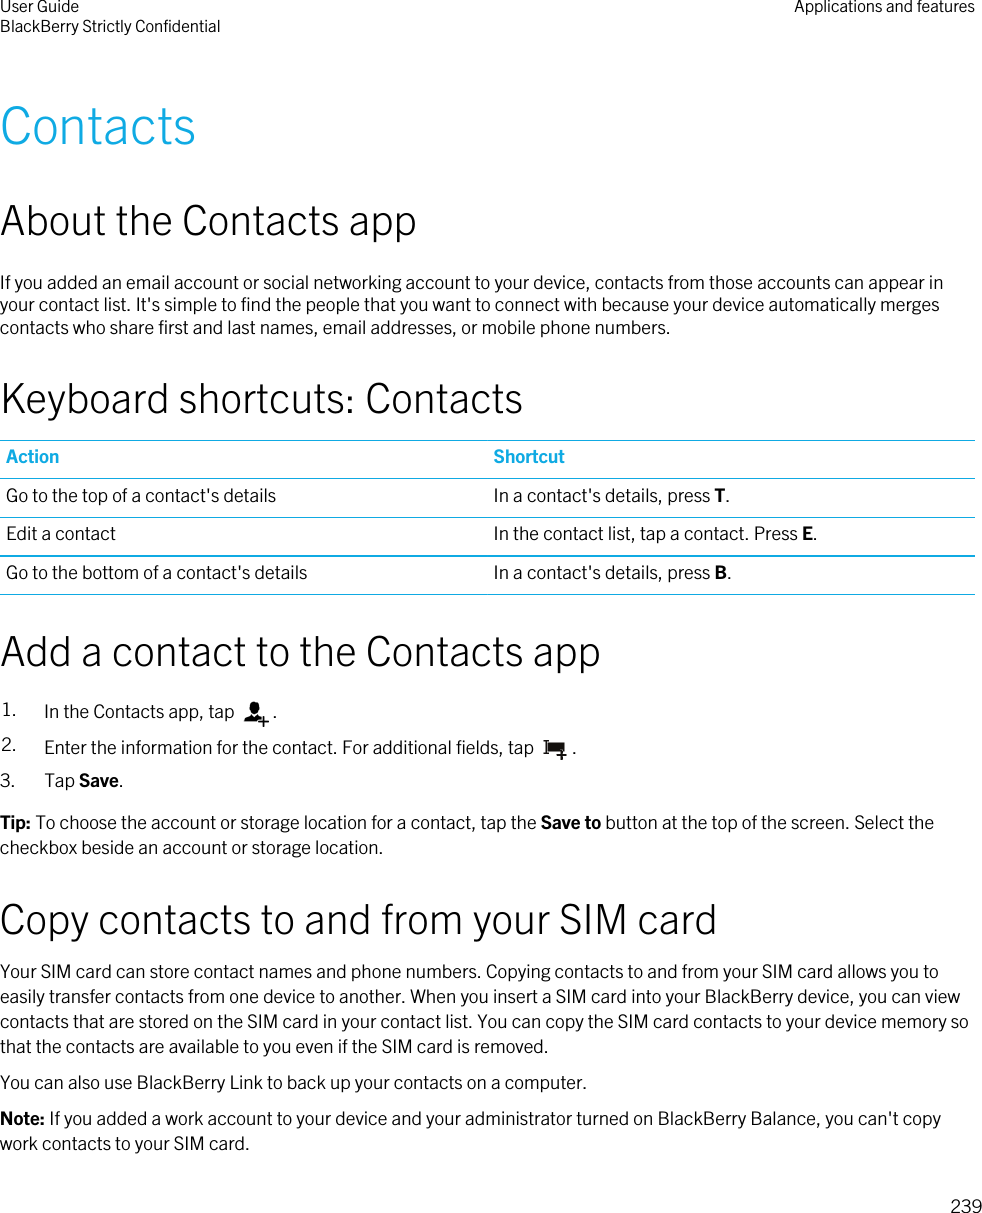 ContactsAbout the Contacts appIf you added an email account or social networking account to your device, contacts from those accounts can appear in your contact list. It&apos;s simple to find the people that you want to connect with because your device automatically merges contacts who share first and last names, email addresses, or mobile phone numbers.Keyboard shortcuts: ContactsAction ShortcutGo to the top of a contact&apos;s details In a contact&apos;s details, press T.Edit a contact In the contact list, tap a contact. Press E.Go to the bottom of a contact&apos;s details In a contact&apos;s details, press B.Add a contact to the Contacts app1. In the Contacts app, tap  .2. Enter the information for the contact. For additional fields, tap  .3. Tap Save.Tip: To choose the account or storage location for a contact, tap the Save to button at the top of the screen. Select the checkbox beside an account or storage location.Copy contacts to and from your SIM cardYour SIM card can store contact names and phone numbers. Copying contacts to and from your SIM card allows you to easily transfer contacts from one device to another. When you insert a SIM card into your BlackBerry device, you can view contacts that are stored on the SIM card in your contact list. You can copy the SIM card contacts to your device memory so that the contacts are available to you even if the SIM card is removed.You can also use BlackBerry Link to back up your contacts on a computer.Note: If you added a work account to your device and your administrator turned on BlackBerry Balance, you can&apos;t copy work contacts to your SIM card.User GuideBlackBerry Strictly Confidential Applications and features239